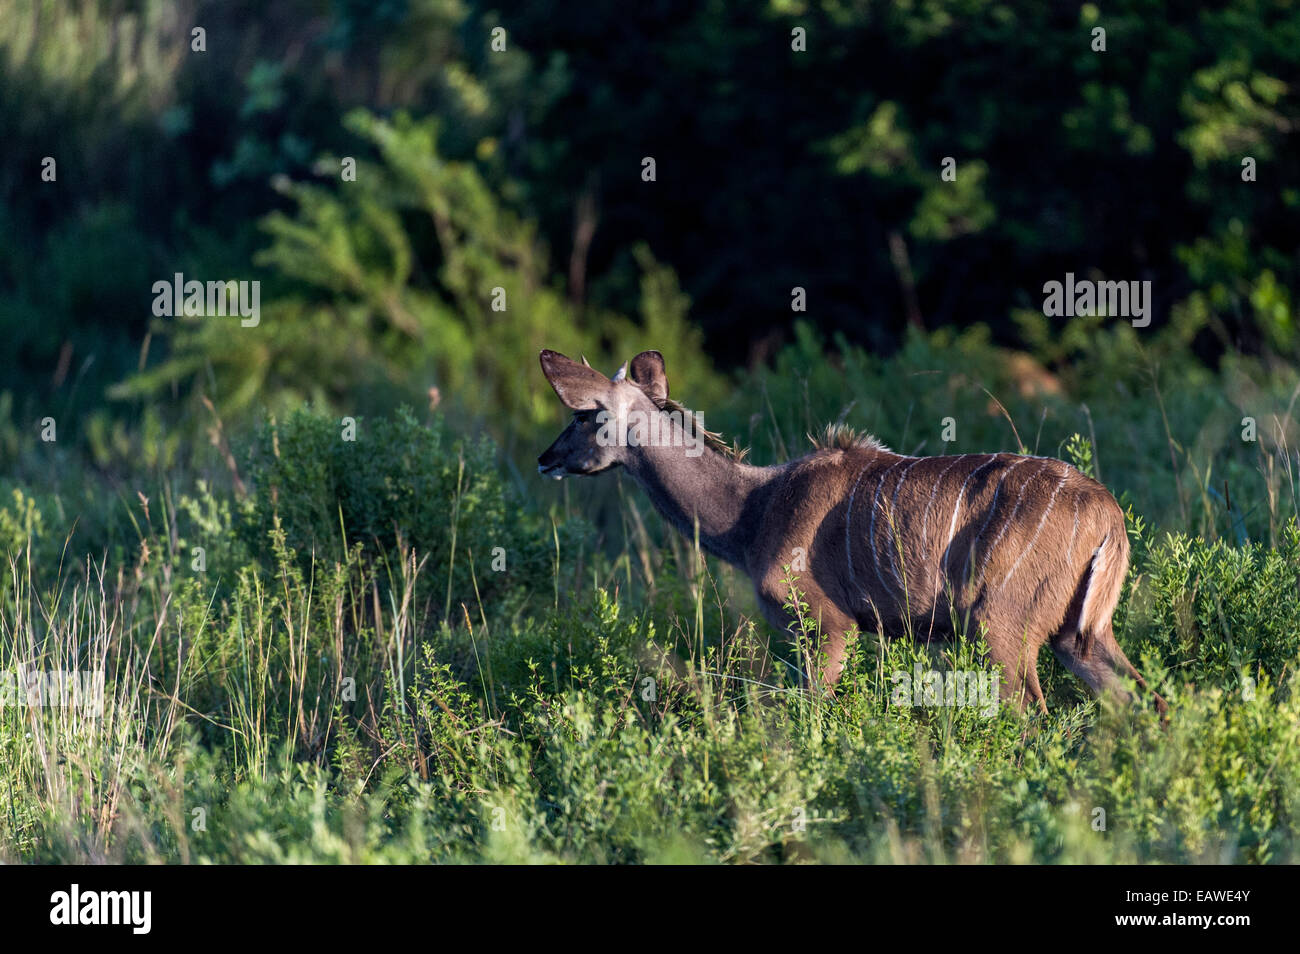 A Greater Kudu stands motionless listening to forest noises at dawn. Stock Photo